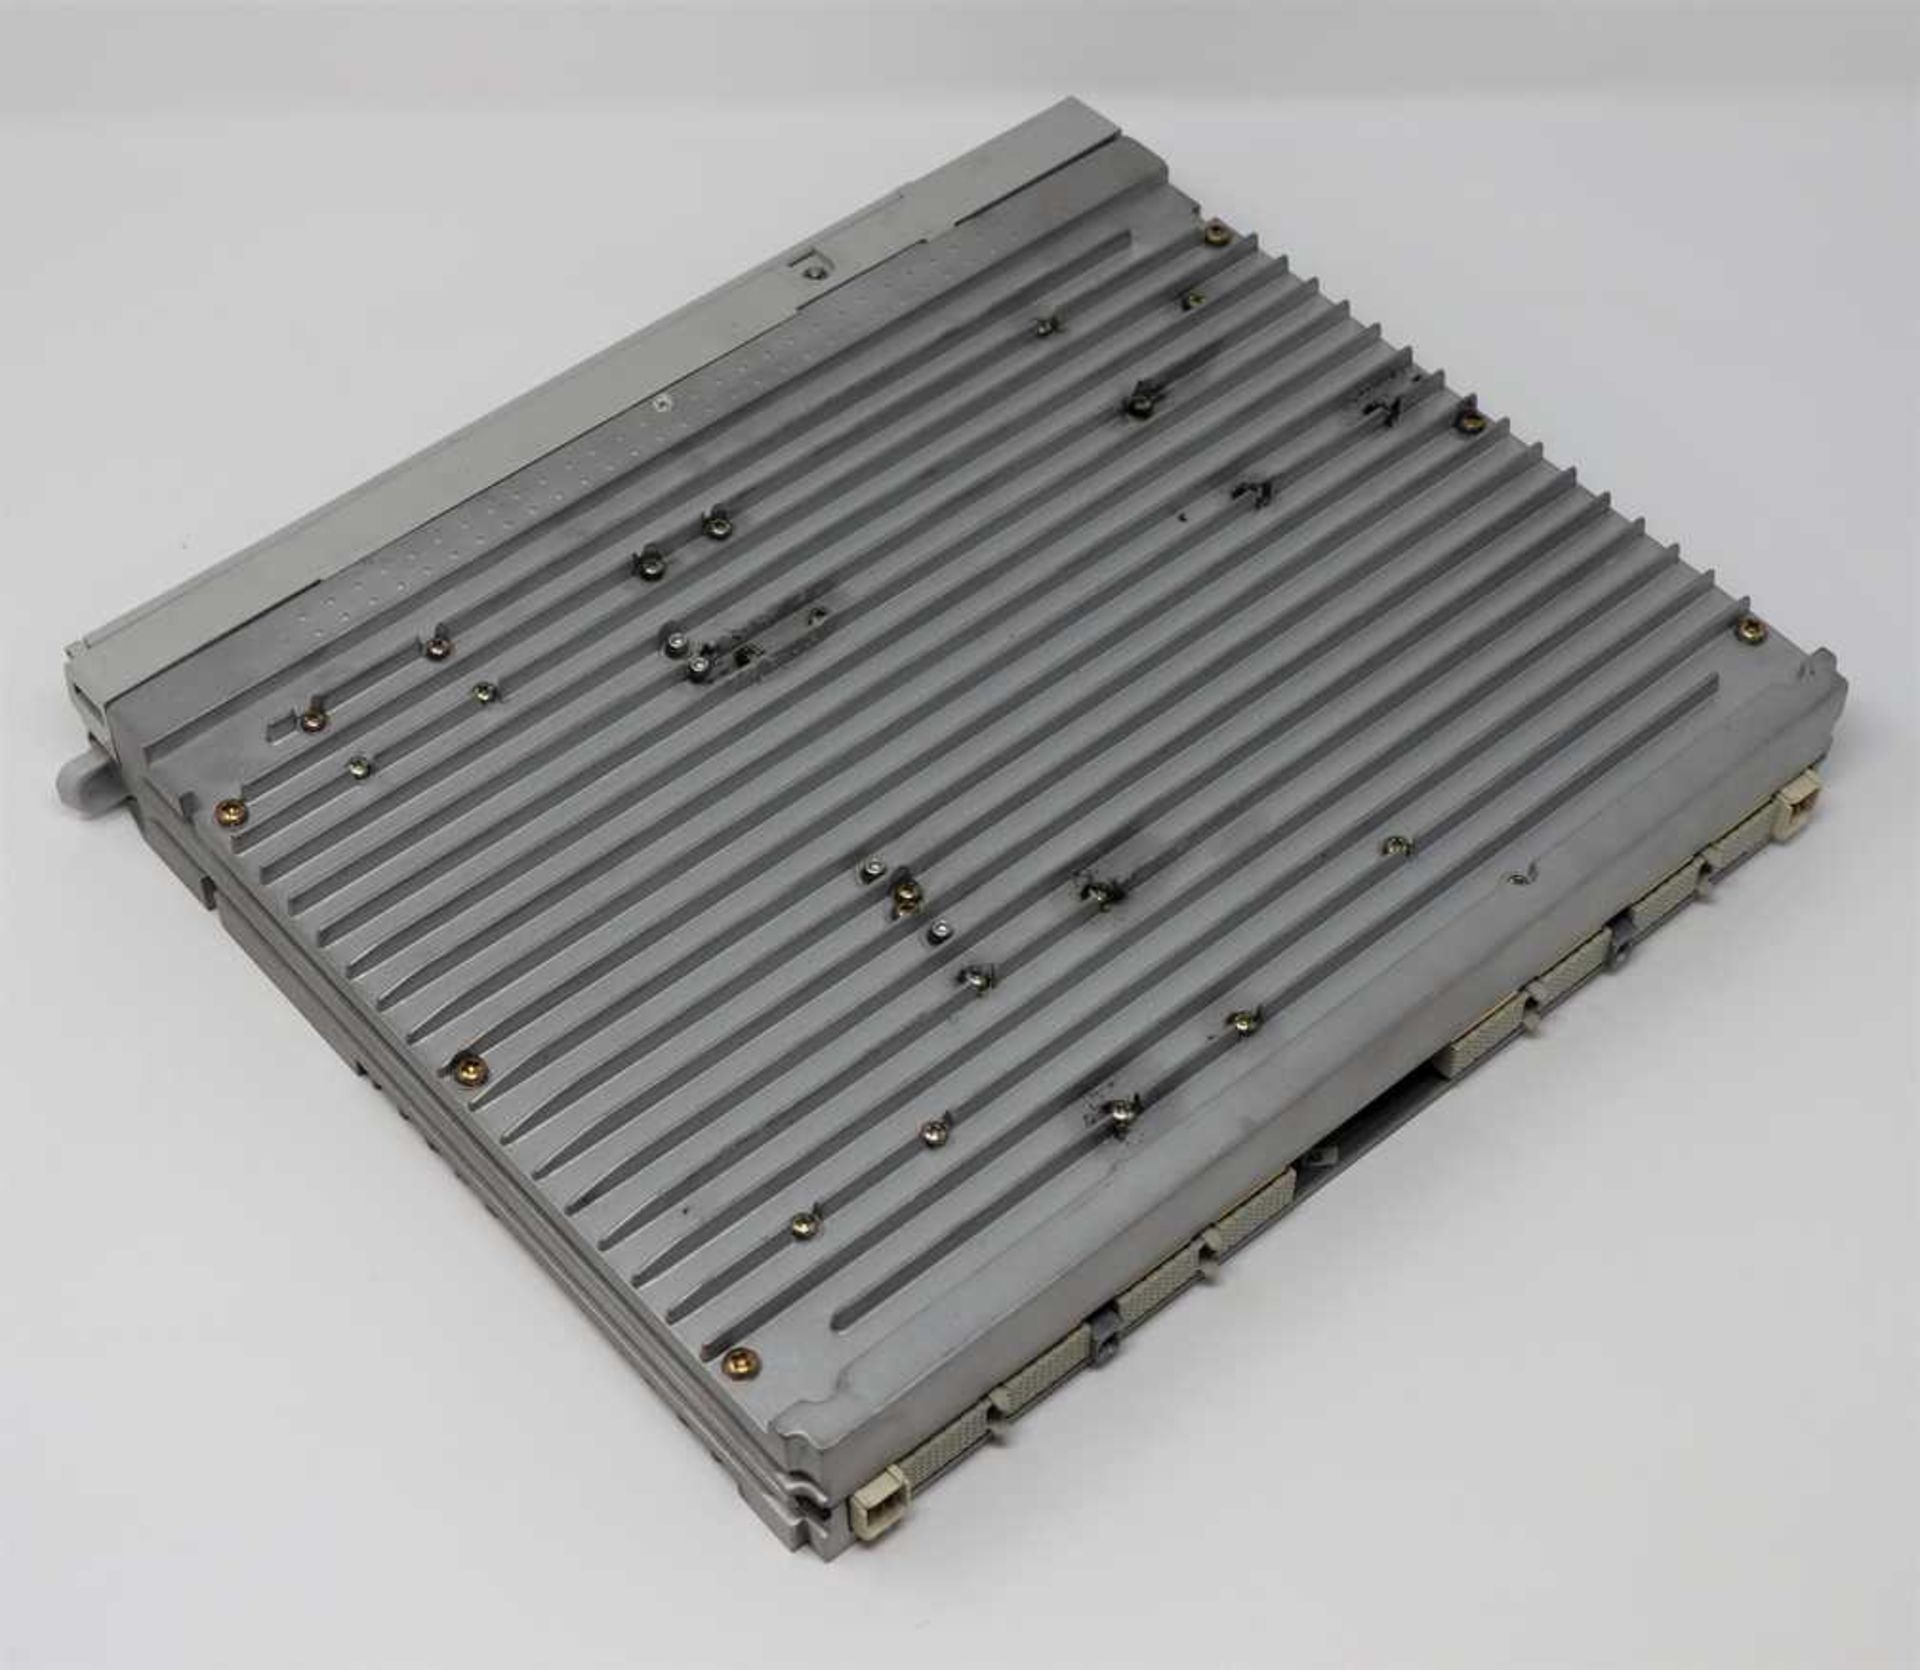 A pre-owned Nortel Optera NTCA04KP WMR3F1AAD 1552 .52NM OC-192 STM-64 XR (Untested, sold as seen).